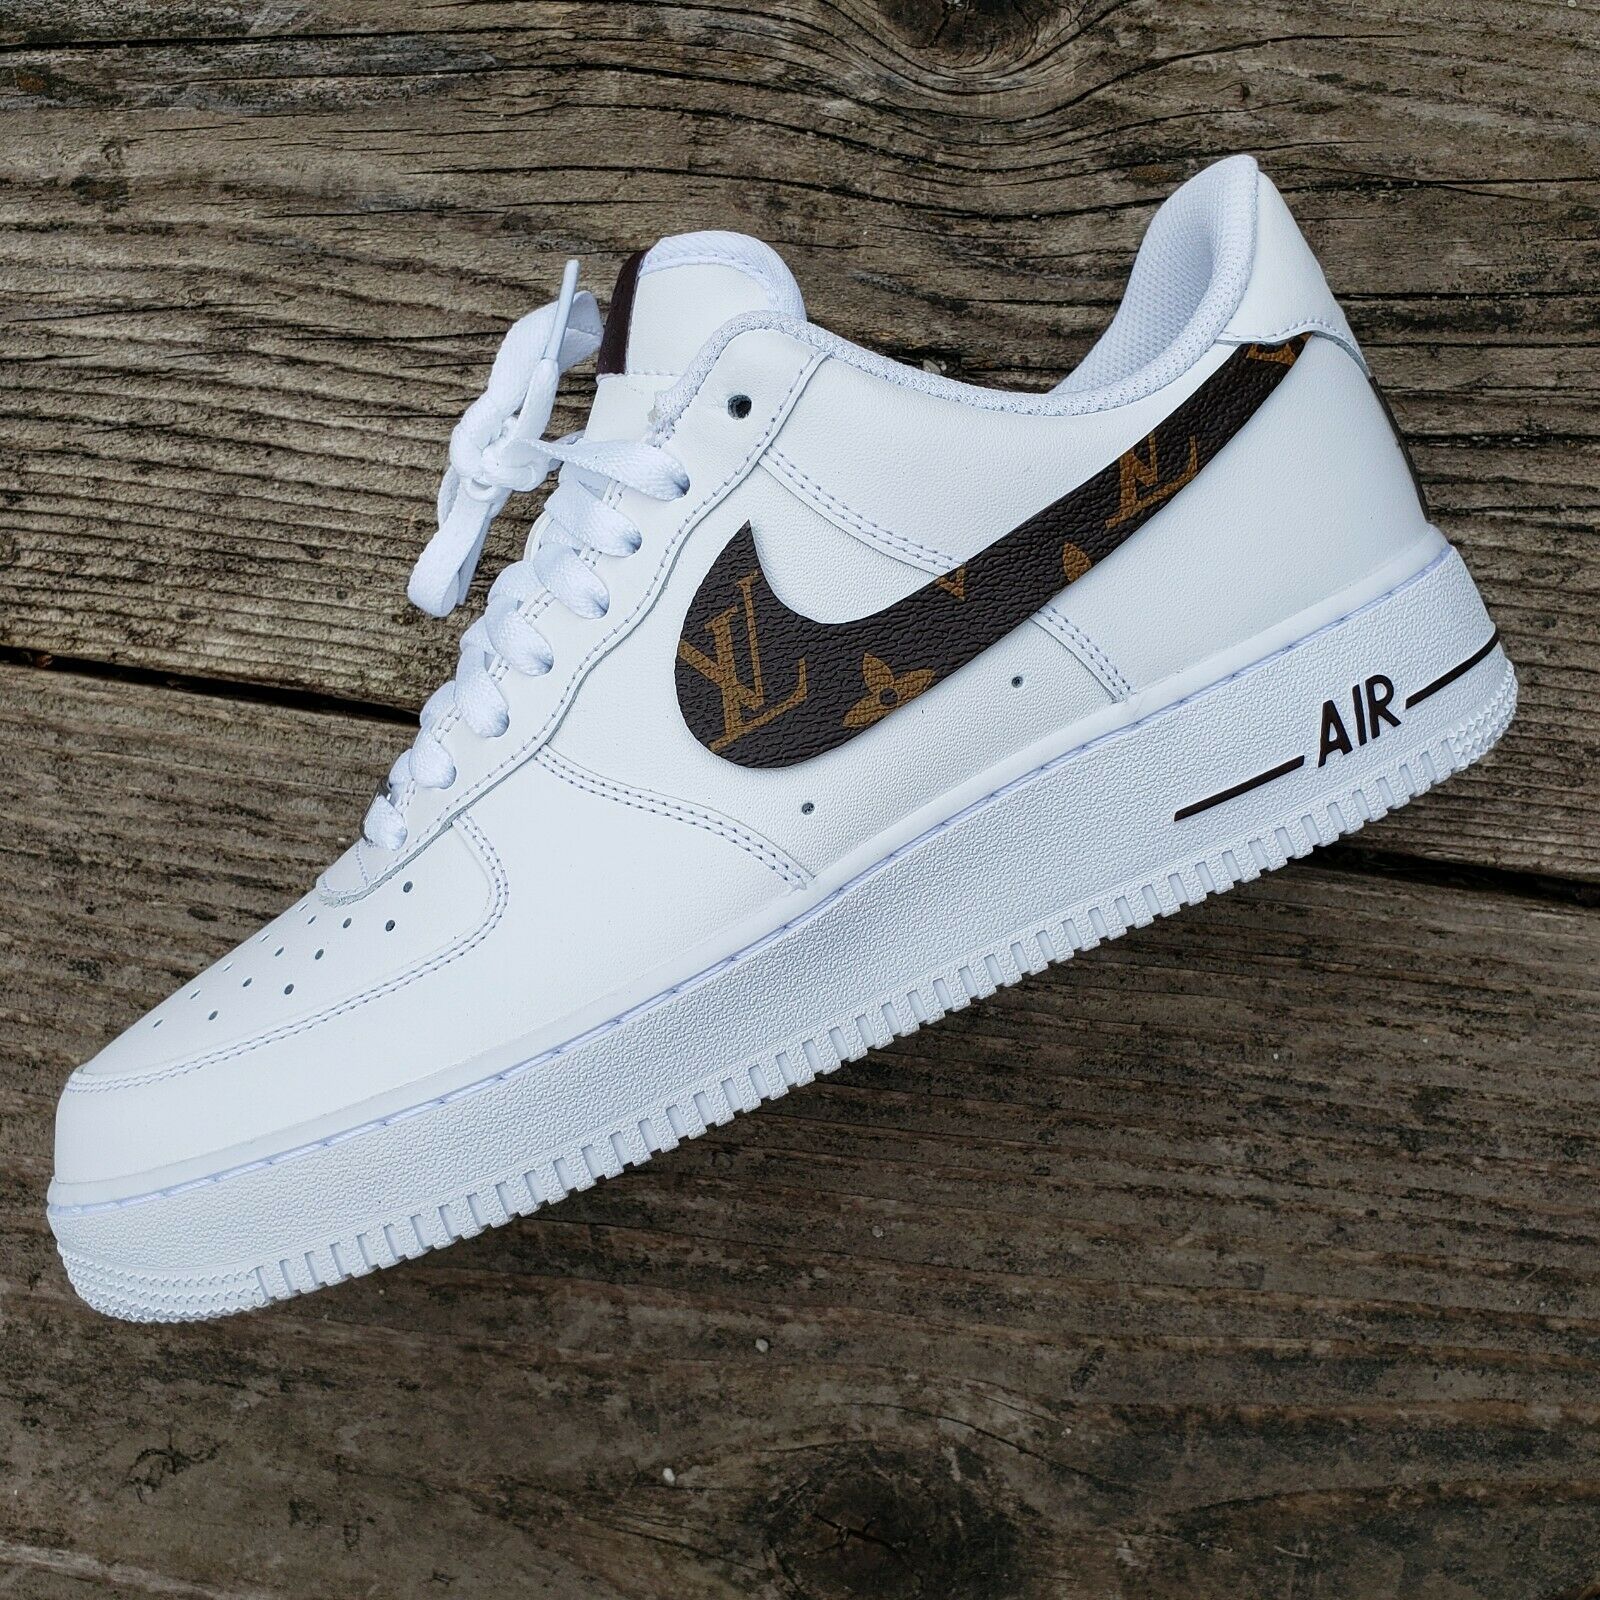 nike air force 1 white custom 'Premium' available in all sizes 6-14 men ...